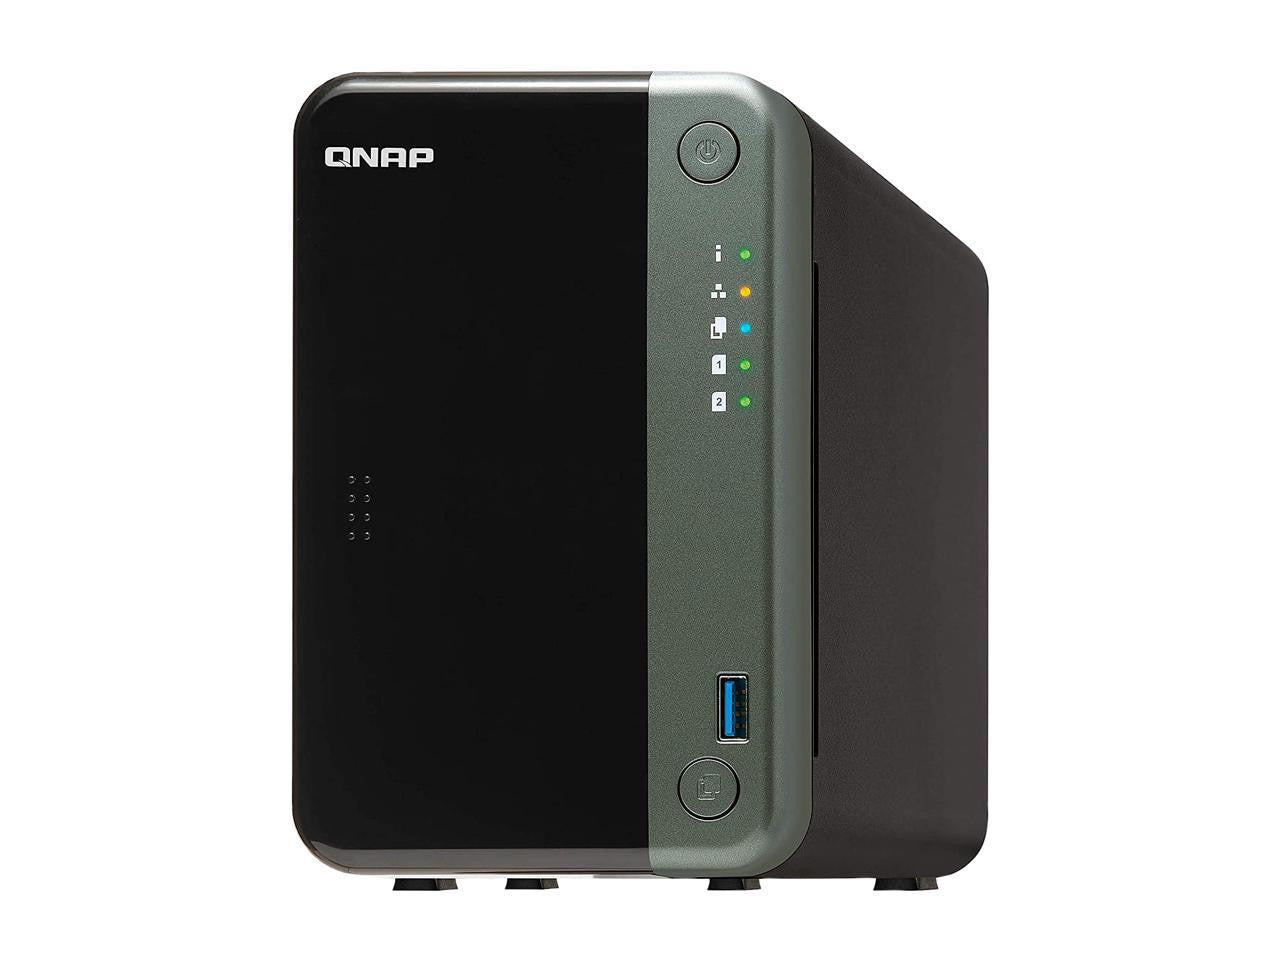 QNAP TS-253D Quad Core 2.7Ghz 2-Bay NAS with 4GB RAM and 20TB (2 x 10TB) of Seagate Ironwolf NAS Drives Fully Assembled and Tested By CustomTechSales